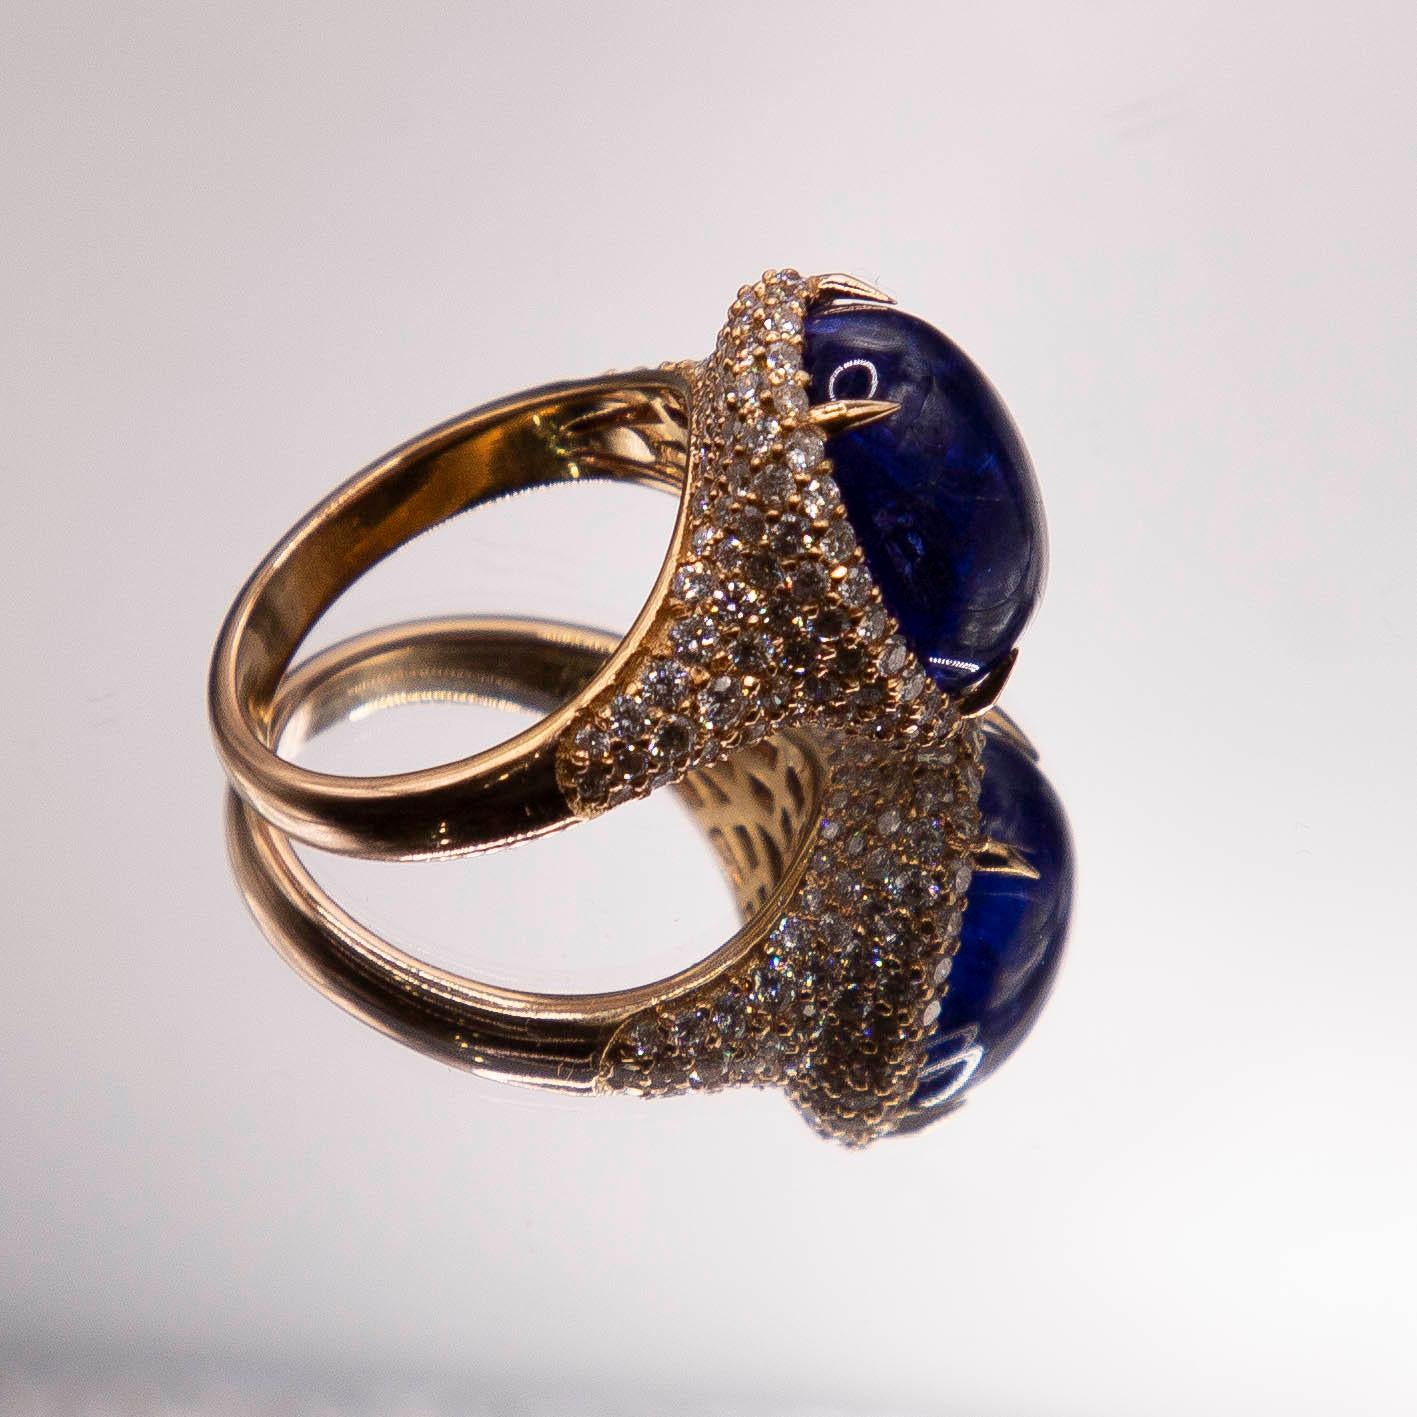 10.69 Carat Oval Cabochon Tanzanite/18k Yellow Gold Ring/2.14 Carats Diamond In New Condition For Sale In Birmingham, MI